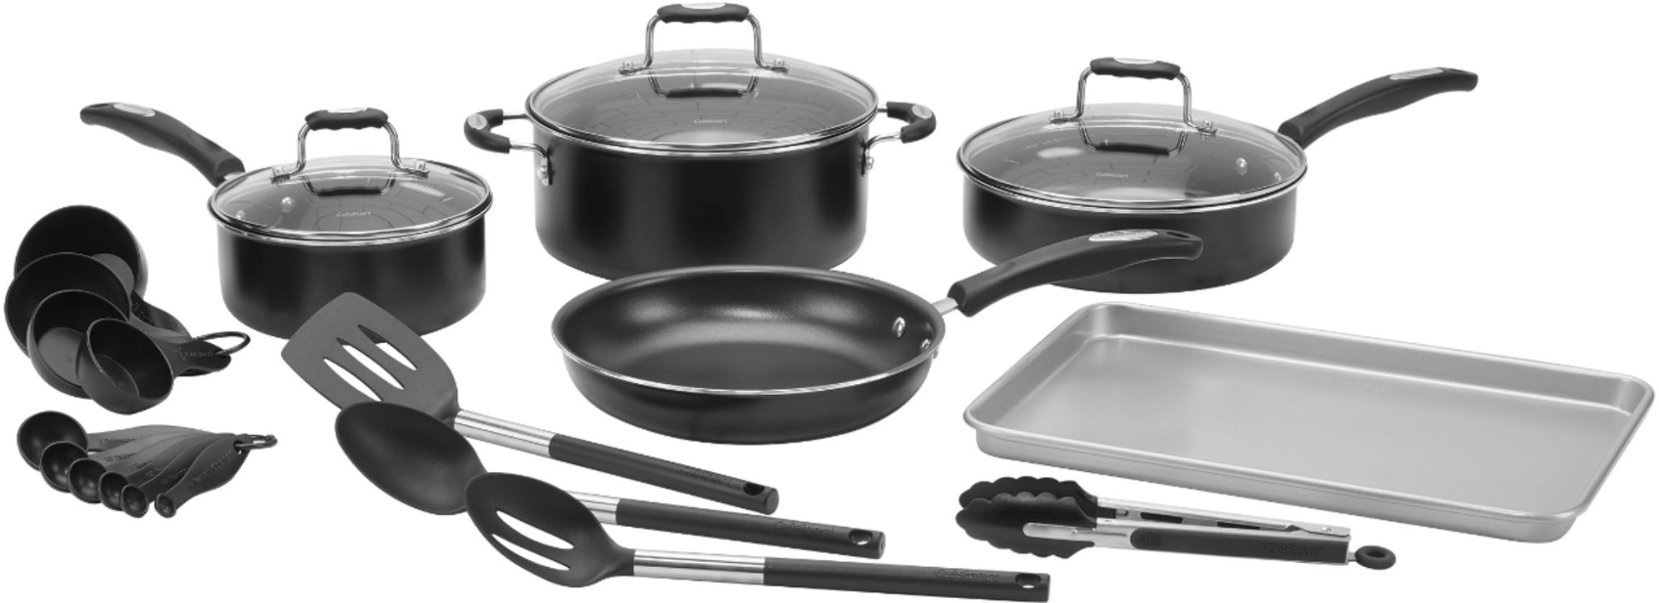 Zoom in on Angle Zoom. Cuisinart - Complete Chef 22 Piece Cookware Set - Silver.